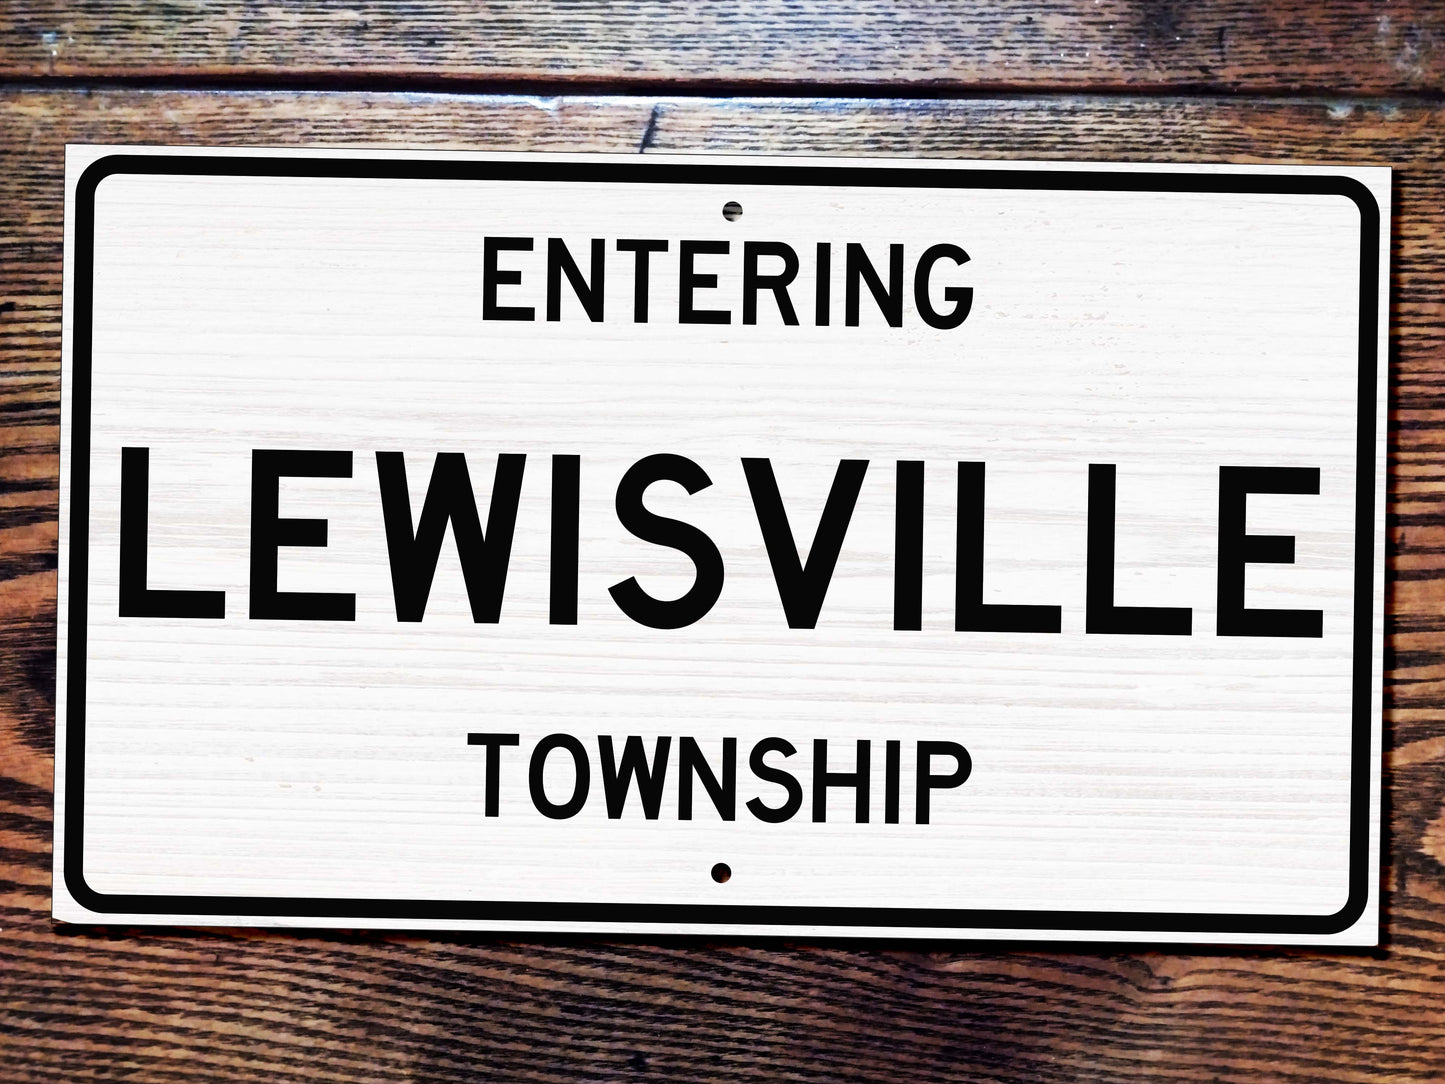 1950's Style City/Town Limits Wood Sign 1/2 Scale. Customizable Lettering